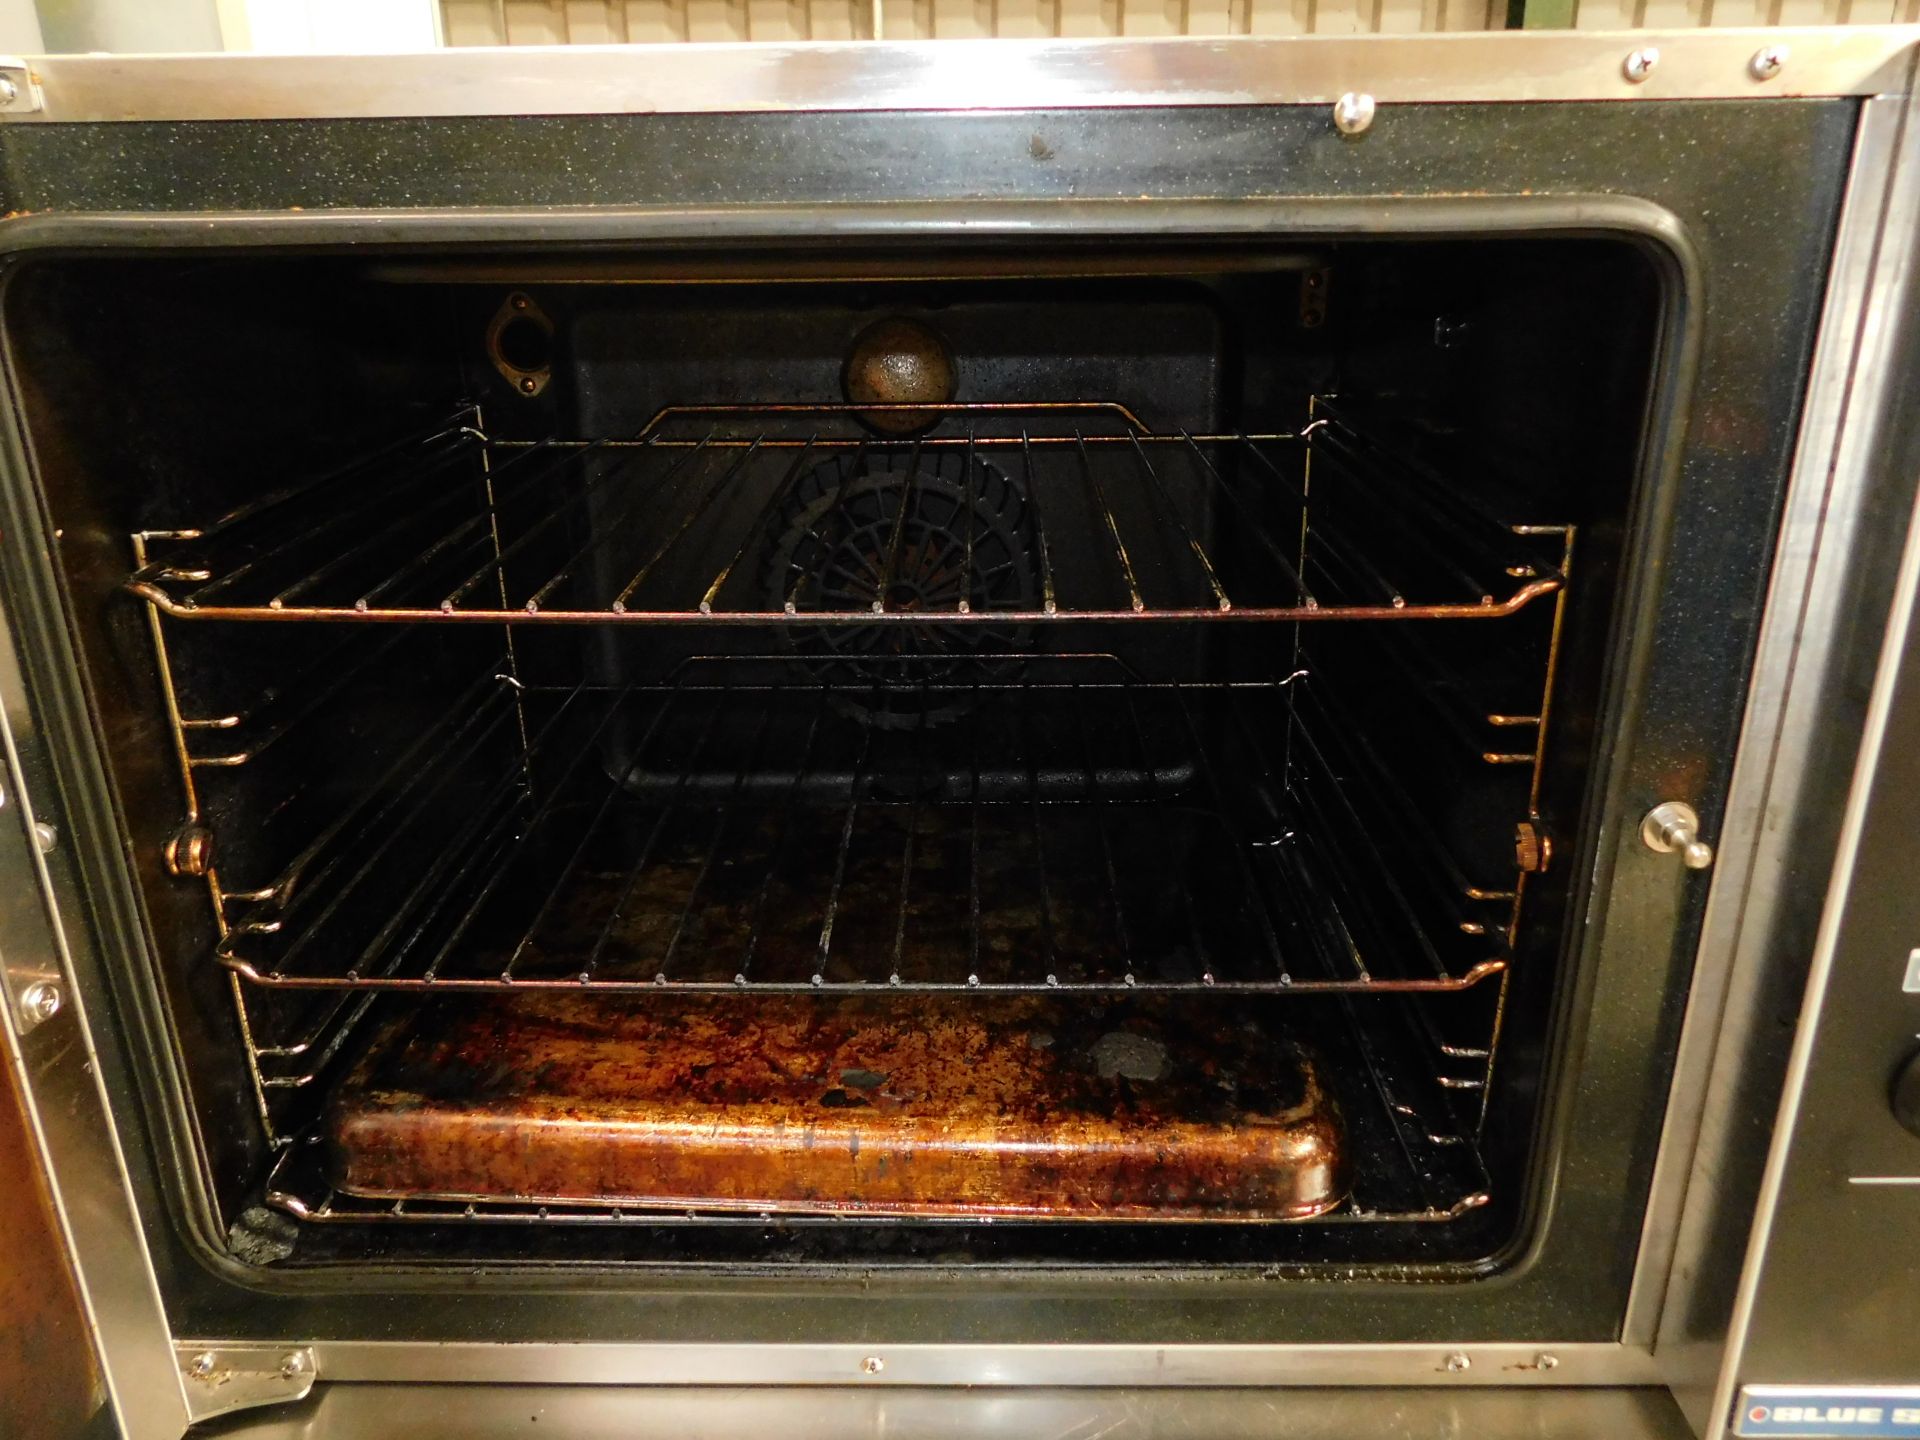 Blue Seal Turbofan E31D4 Convection Oven, Serial Number 1875742 (Location Brentwood. Please Refer to - Image 2 of 4